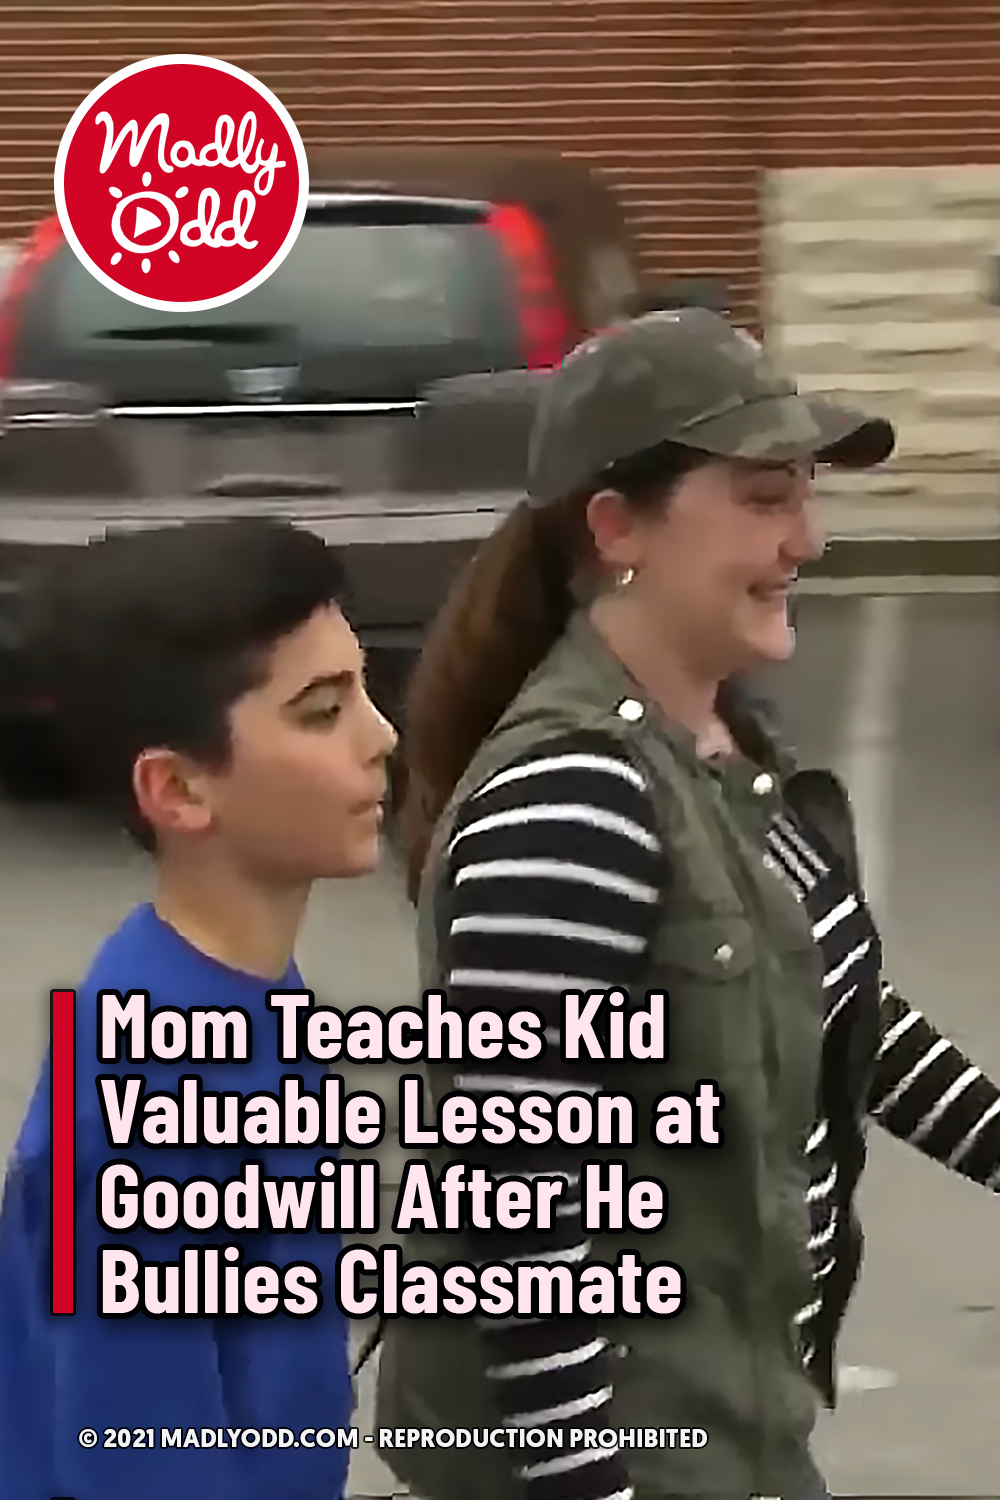 Mom Teaches Kid Valuable Lesson at Goodwill After He Bullies Classmate